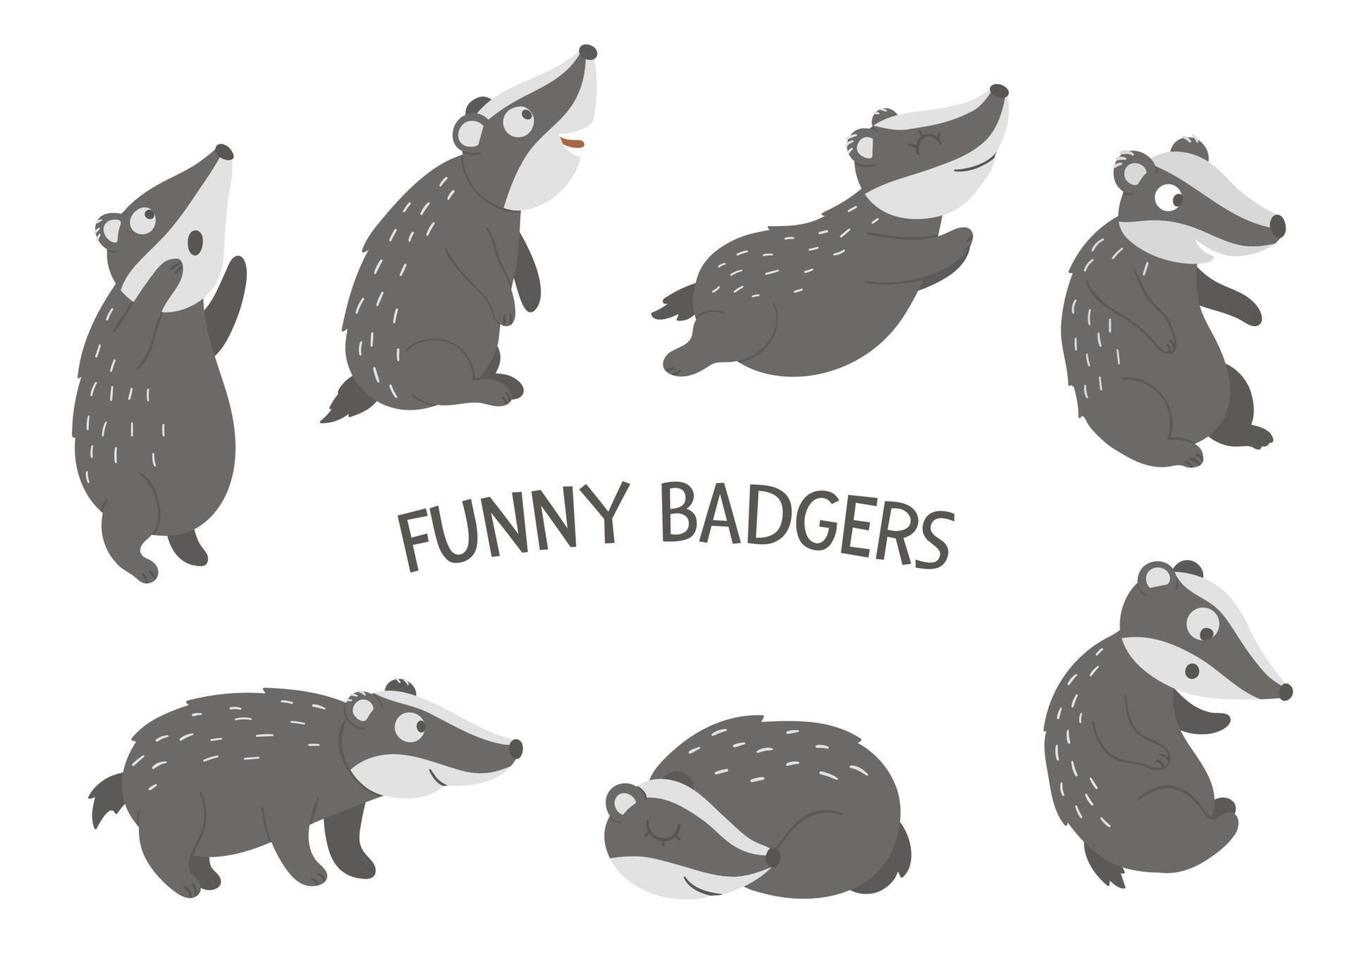 Vector set of cartoon style hand drawn flat funny badgers in different poses. Cute illustration of woodland animals for children design.